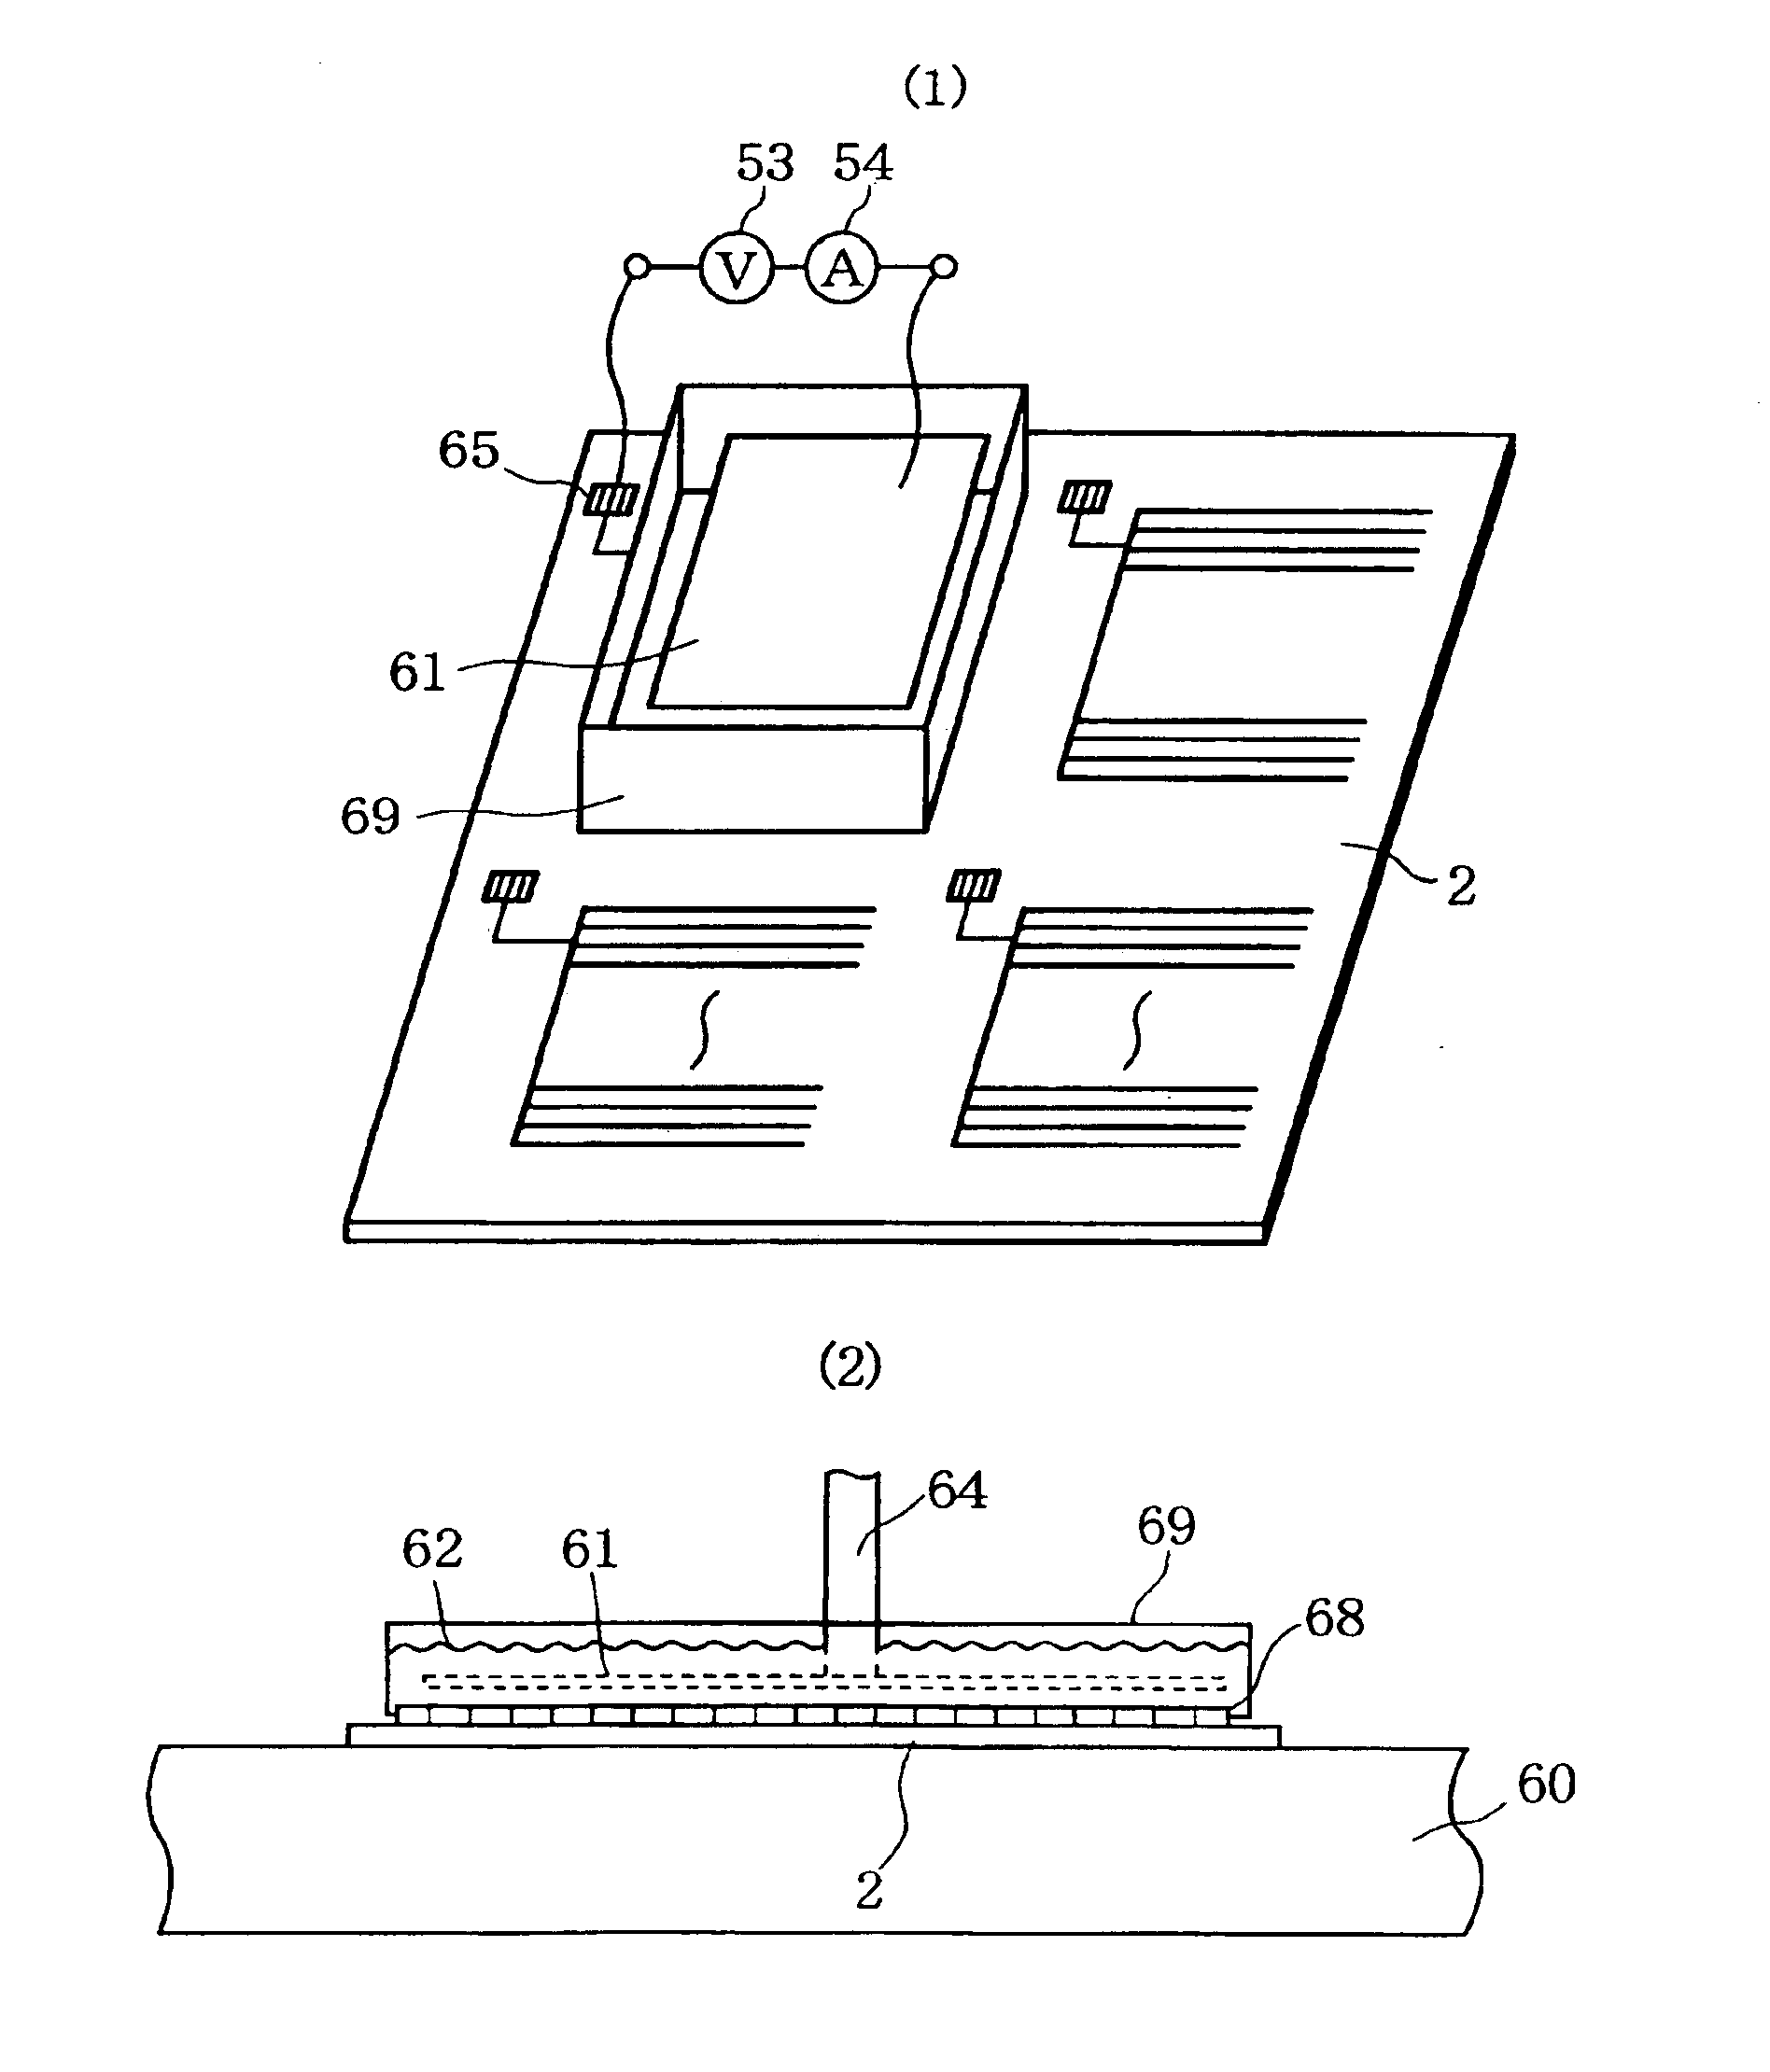 Inspection and repair of active type substrate